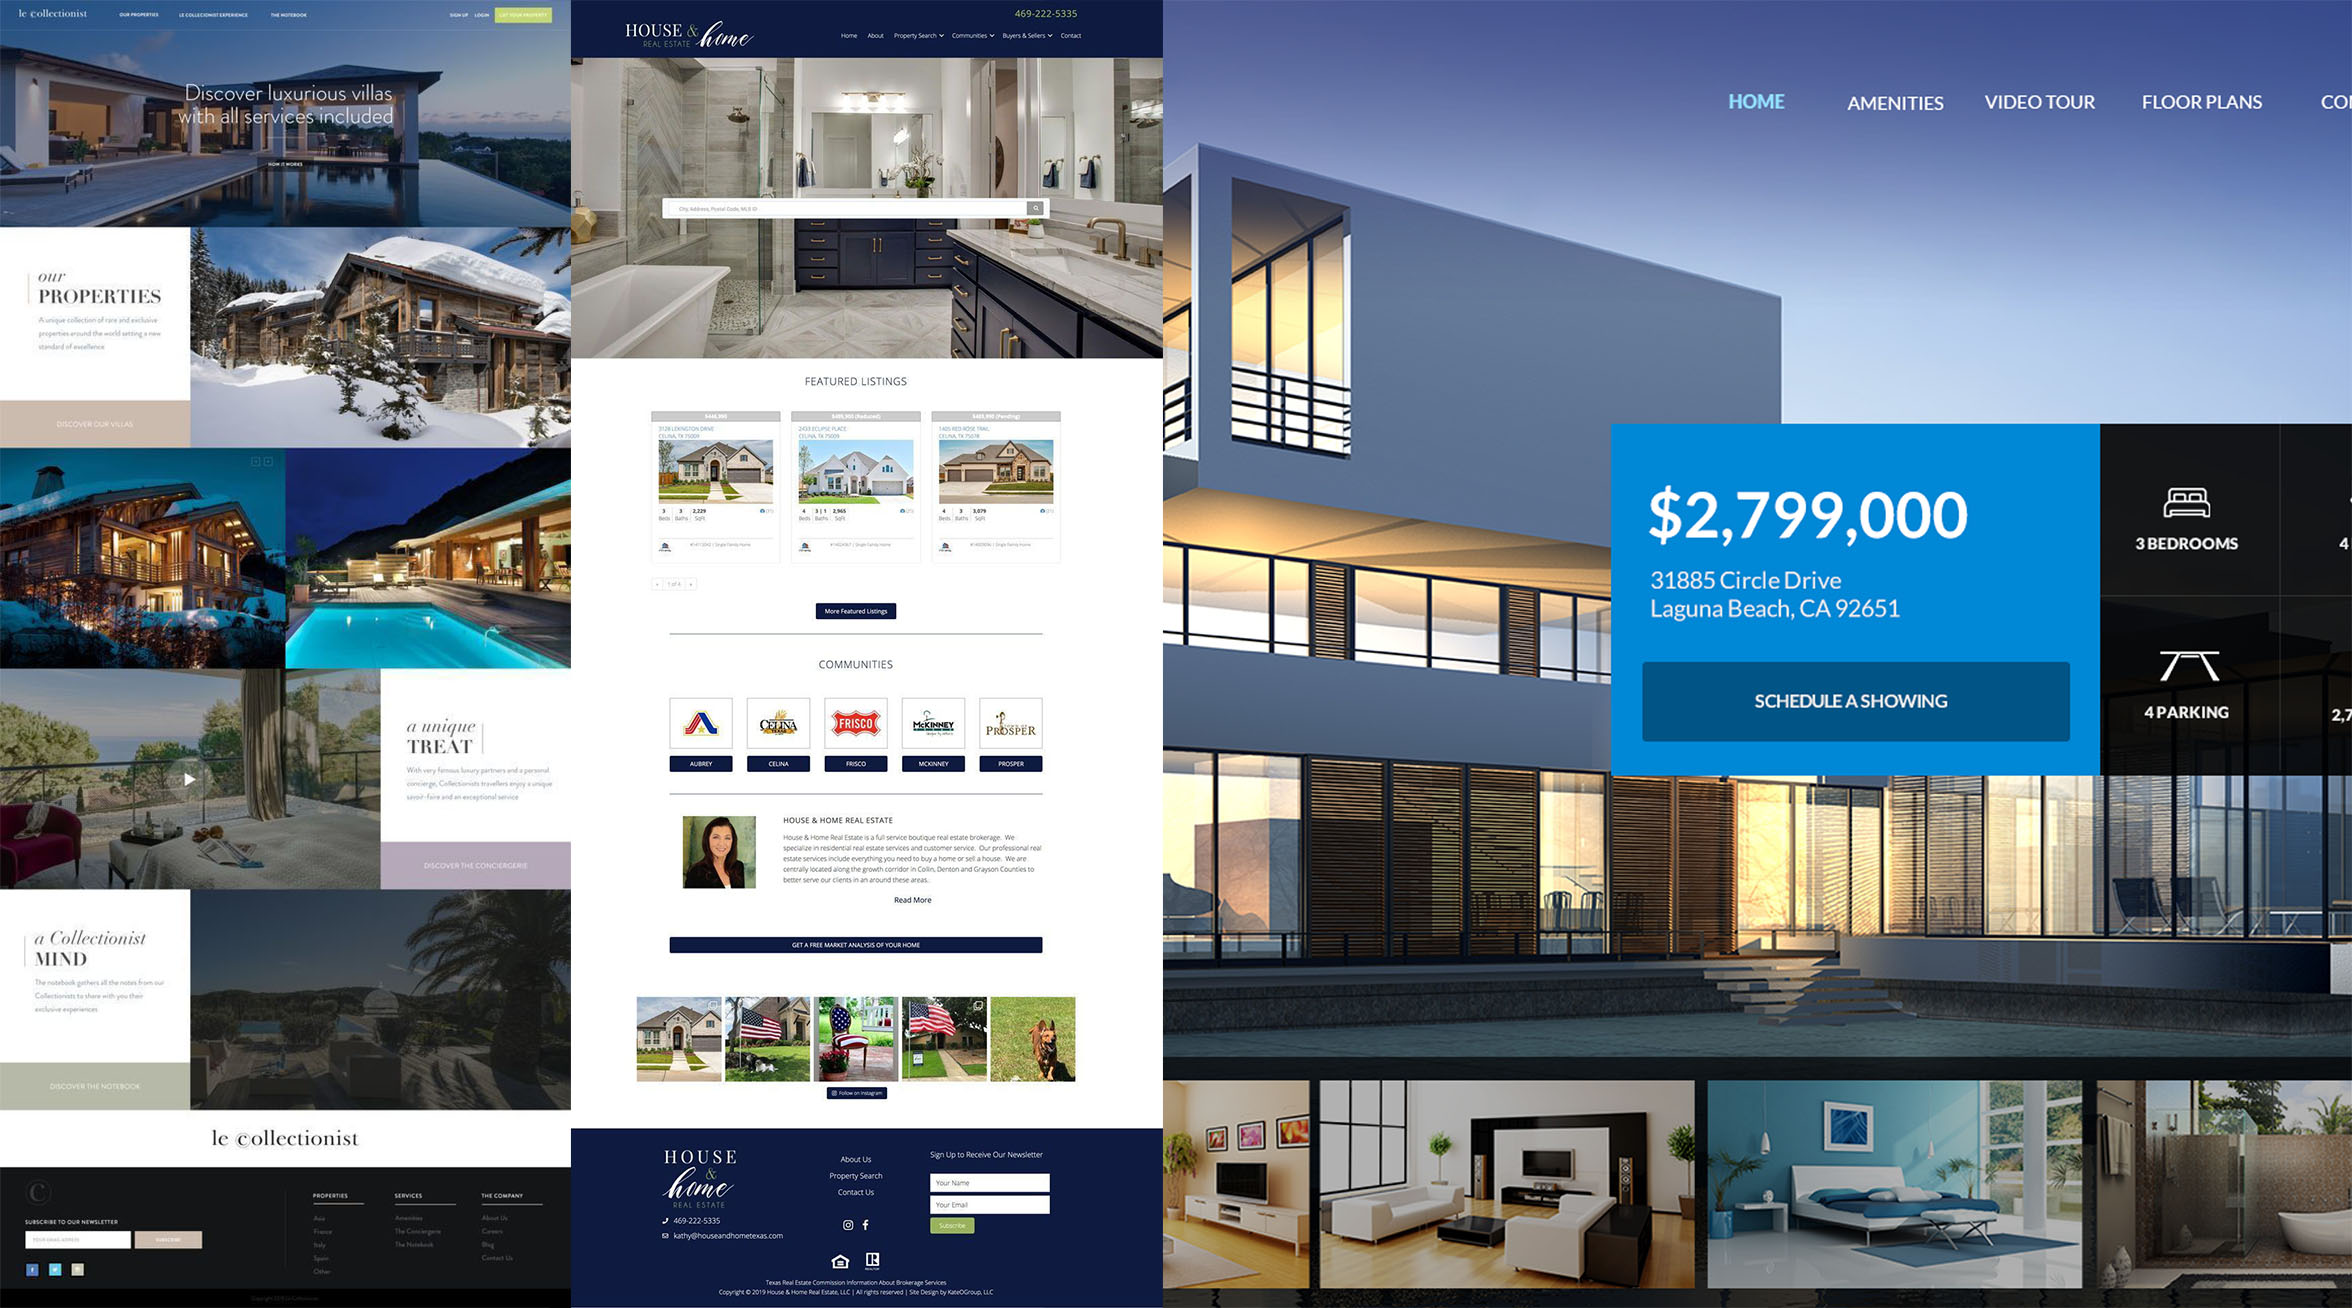 Create a real estate website on Drupal with any functionality - Blo...
                                            </div>
                                        </div>

                                    </div>
                                </div>
                                
                                
                                    <div class=